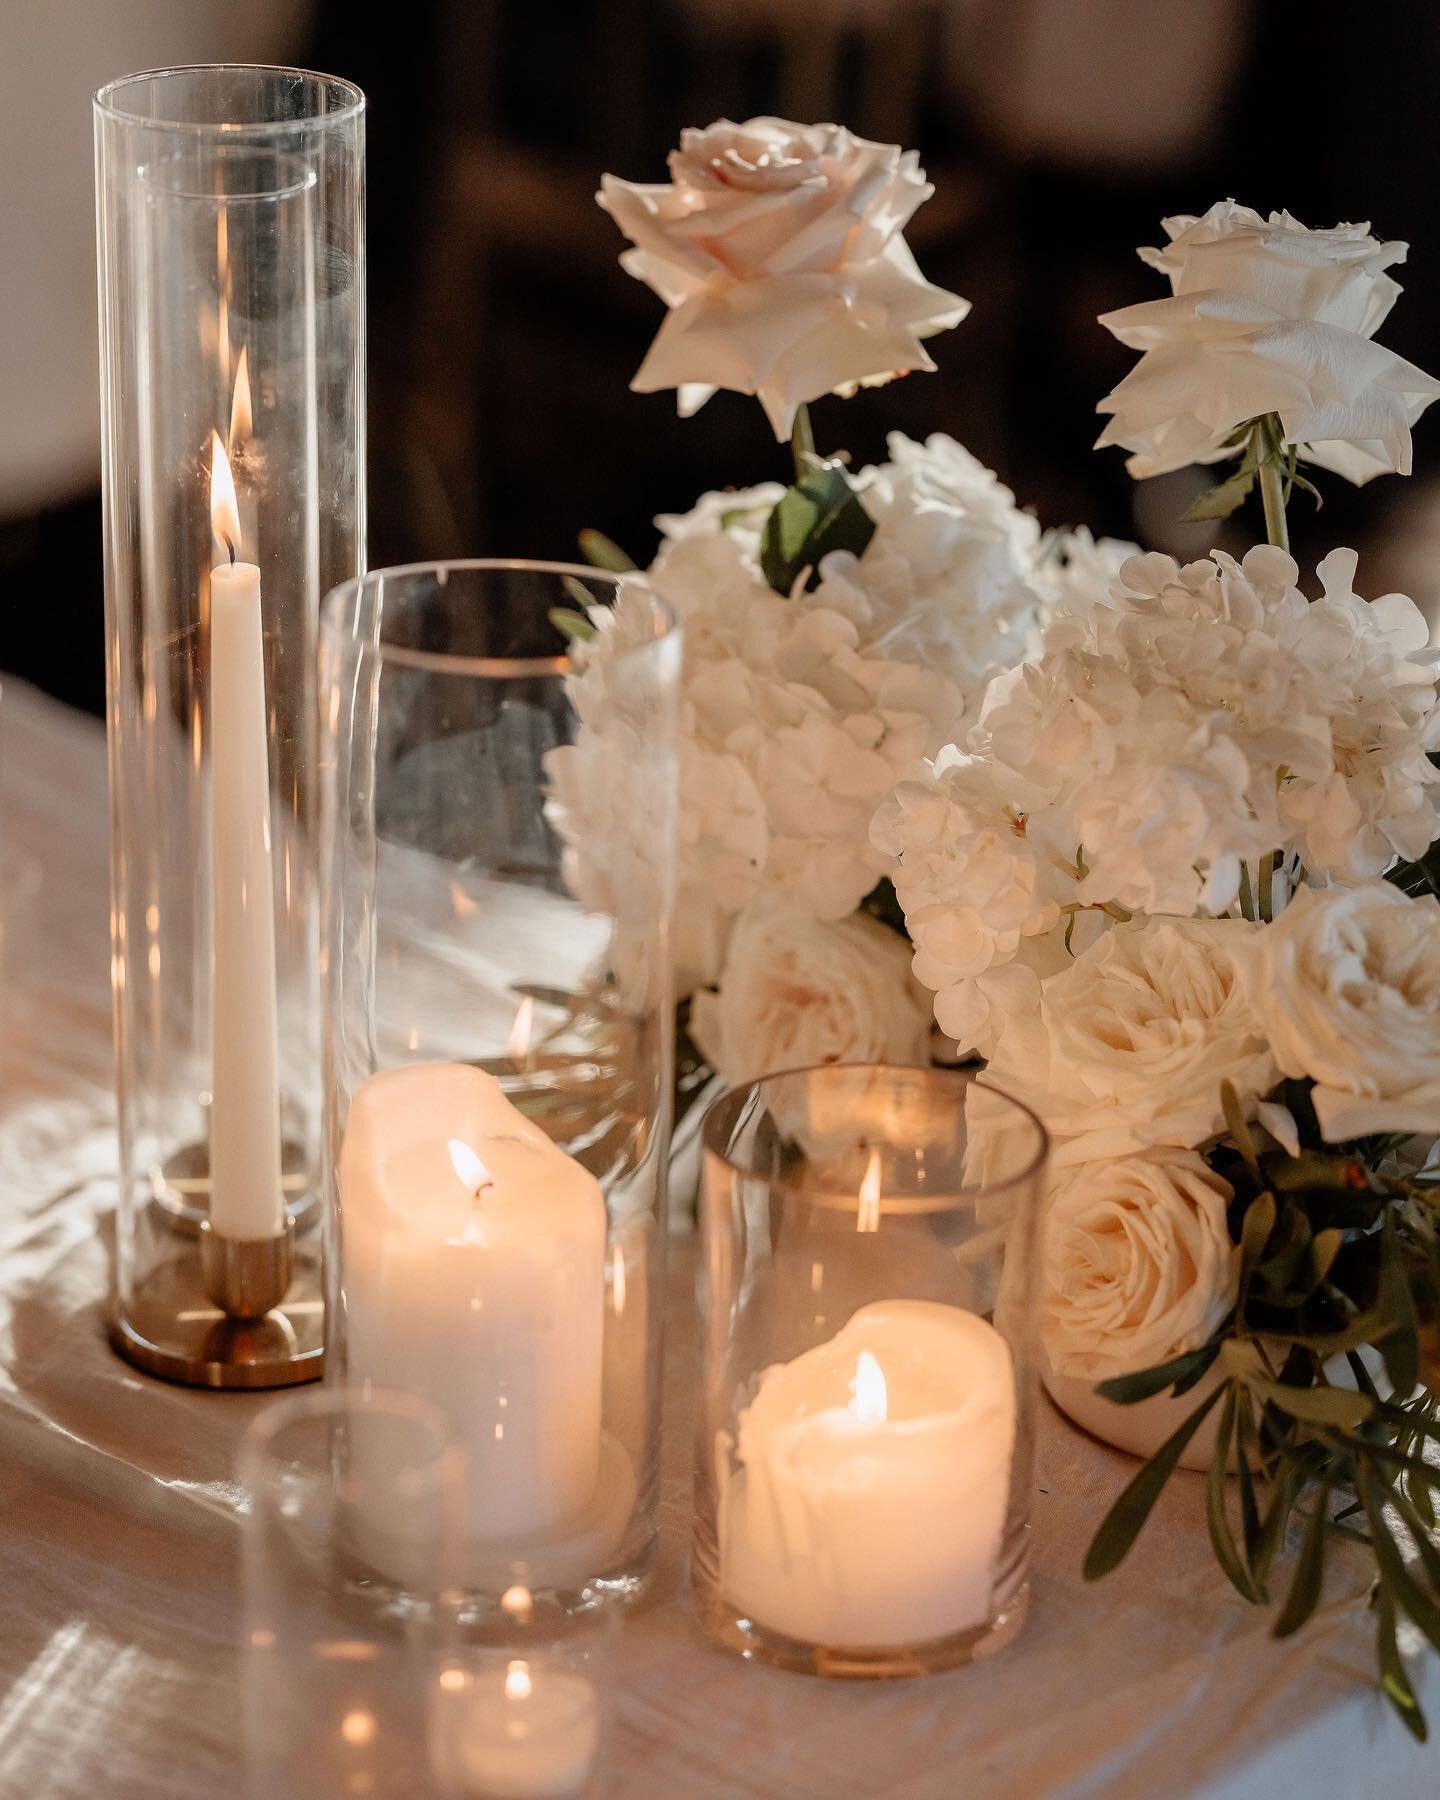 Dinner by candlelight. Best time of year to add a little romantic light into your space. Pillars, tapers &amp; tea lights make a regular appearance at our events. End of season means loads of leftover candle stock to to fill the house with over Winte